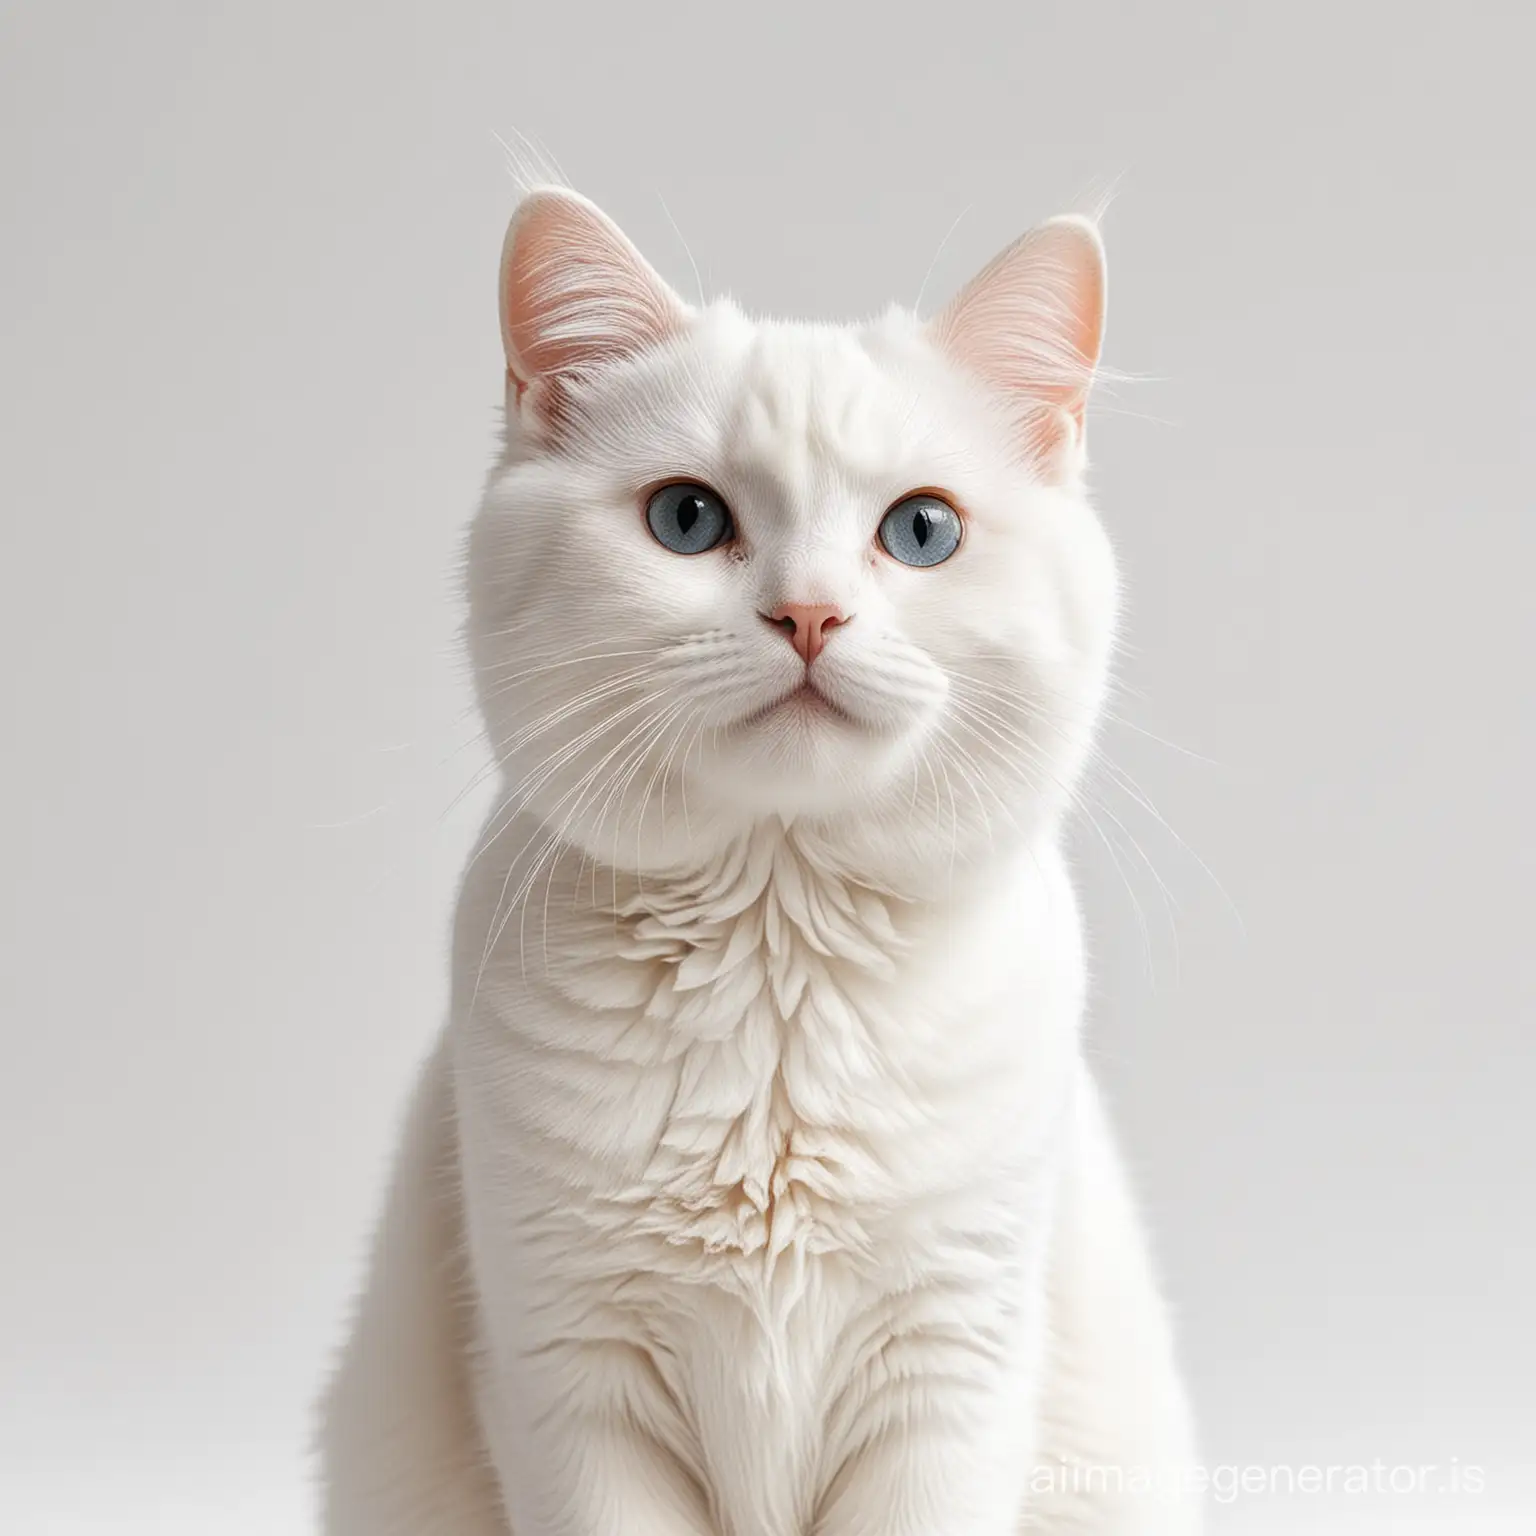 Adorable-White-Cat-Greeting-on-Clean-White-Background